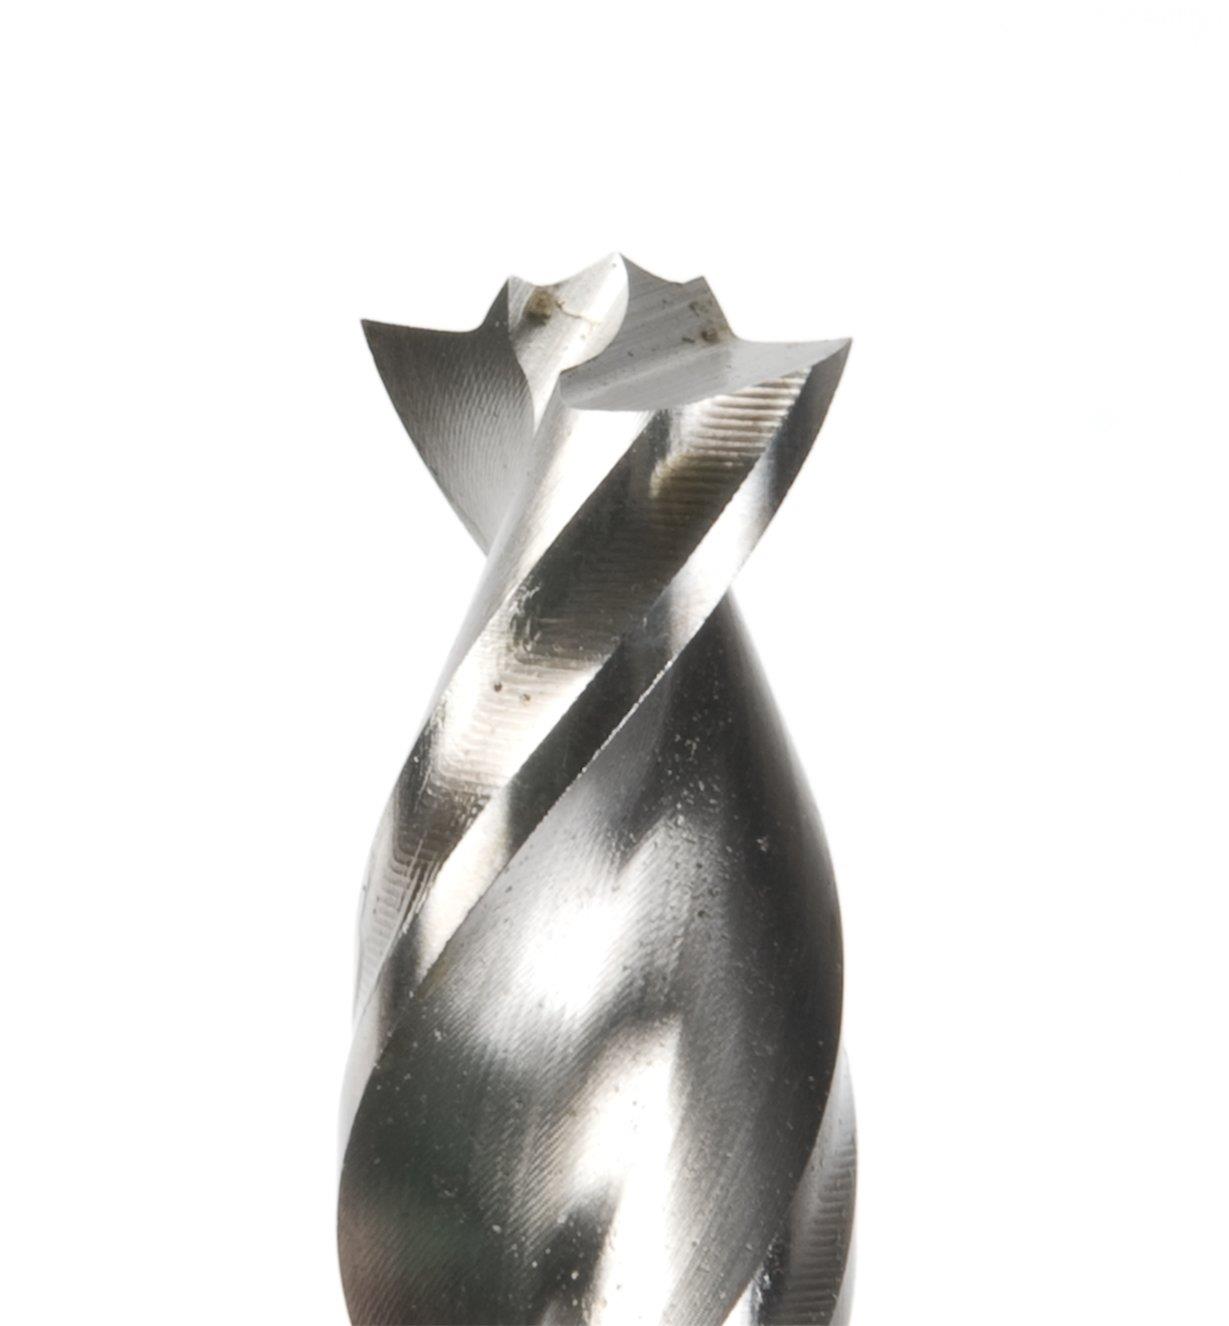 Close-up of tip of Parabolic-Flute Drill Bit